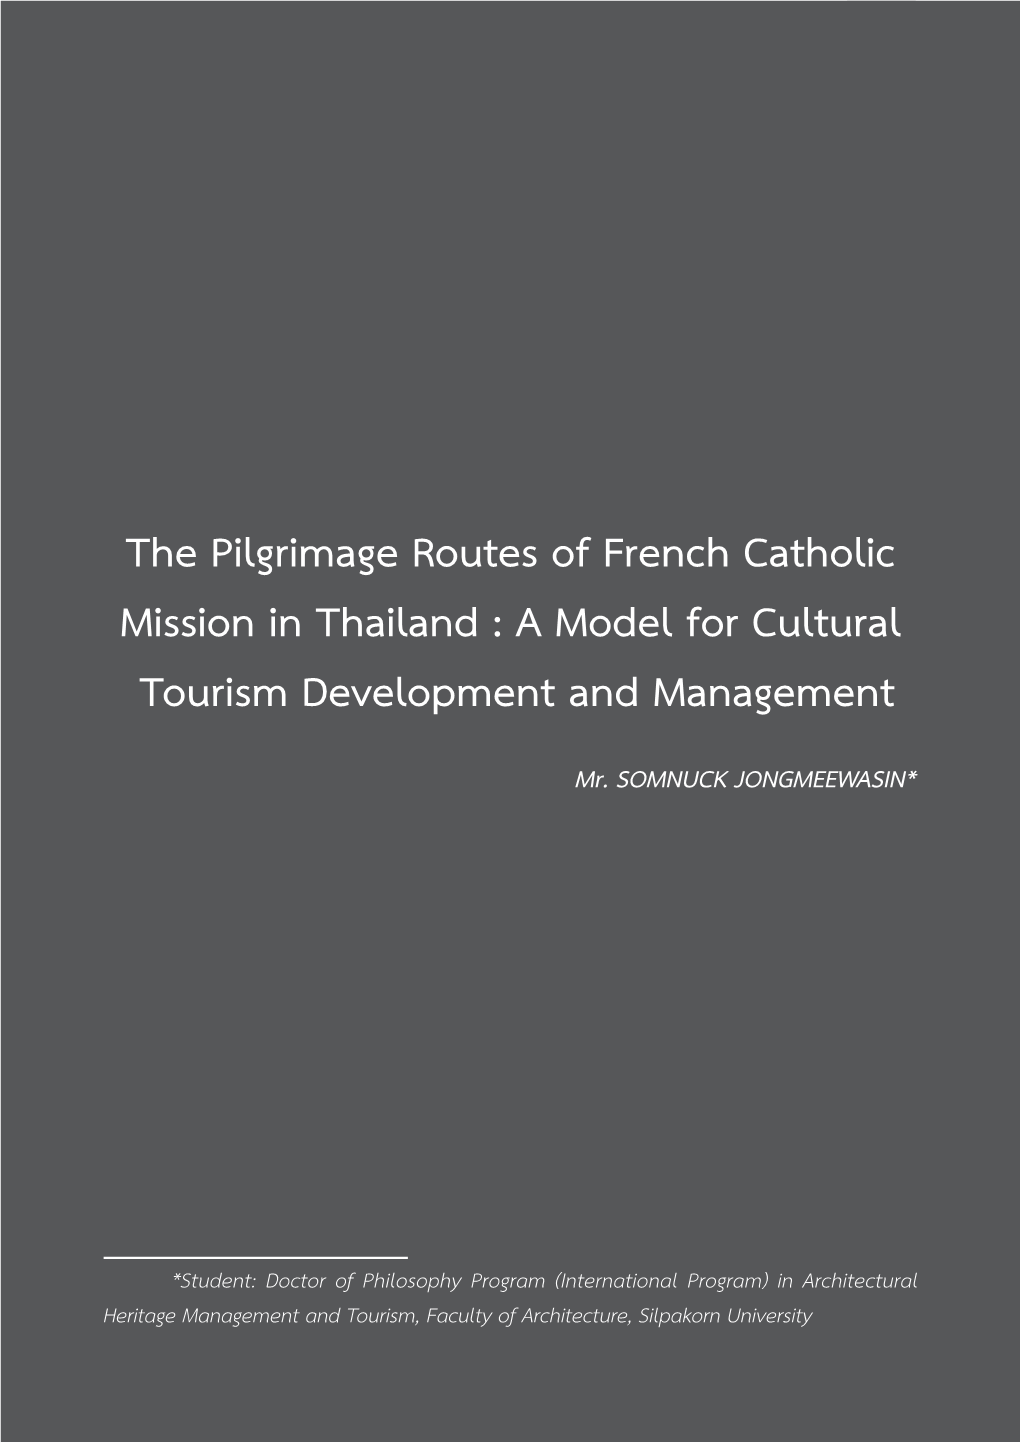 The Pilgrimage Routes of French Catholic Mission in Thailand : a Model for Cultural Tourism Development and Management